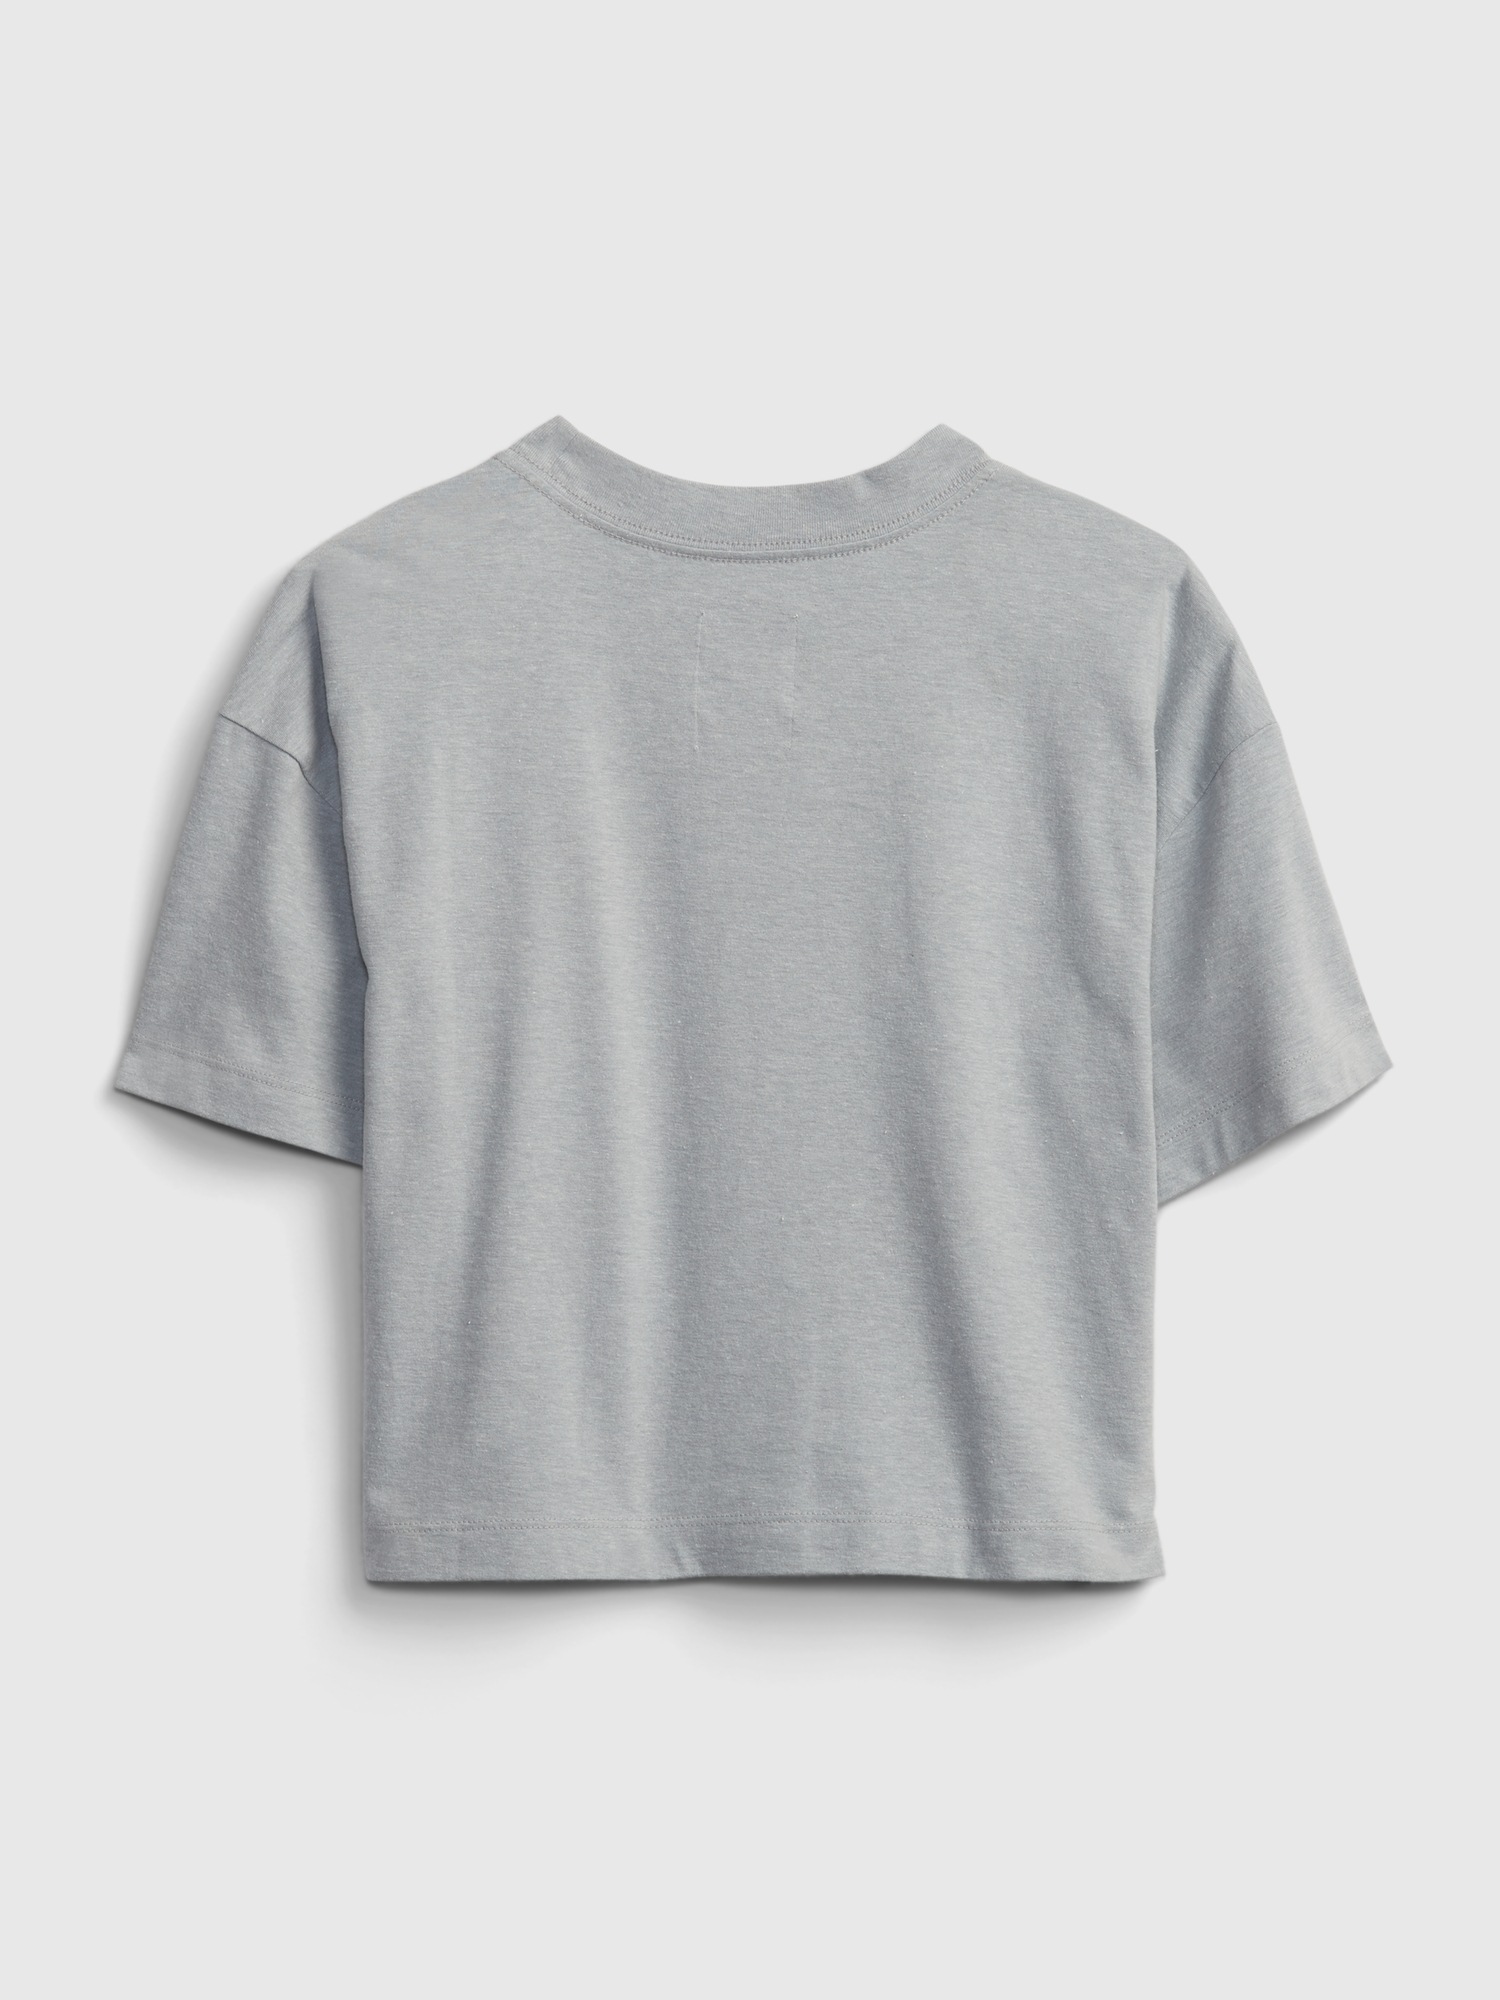 Teen | The Office Recycled Boxy Crop Top | Gap